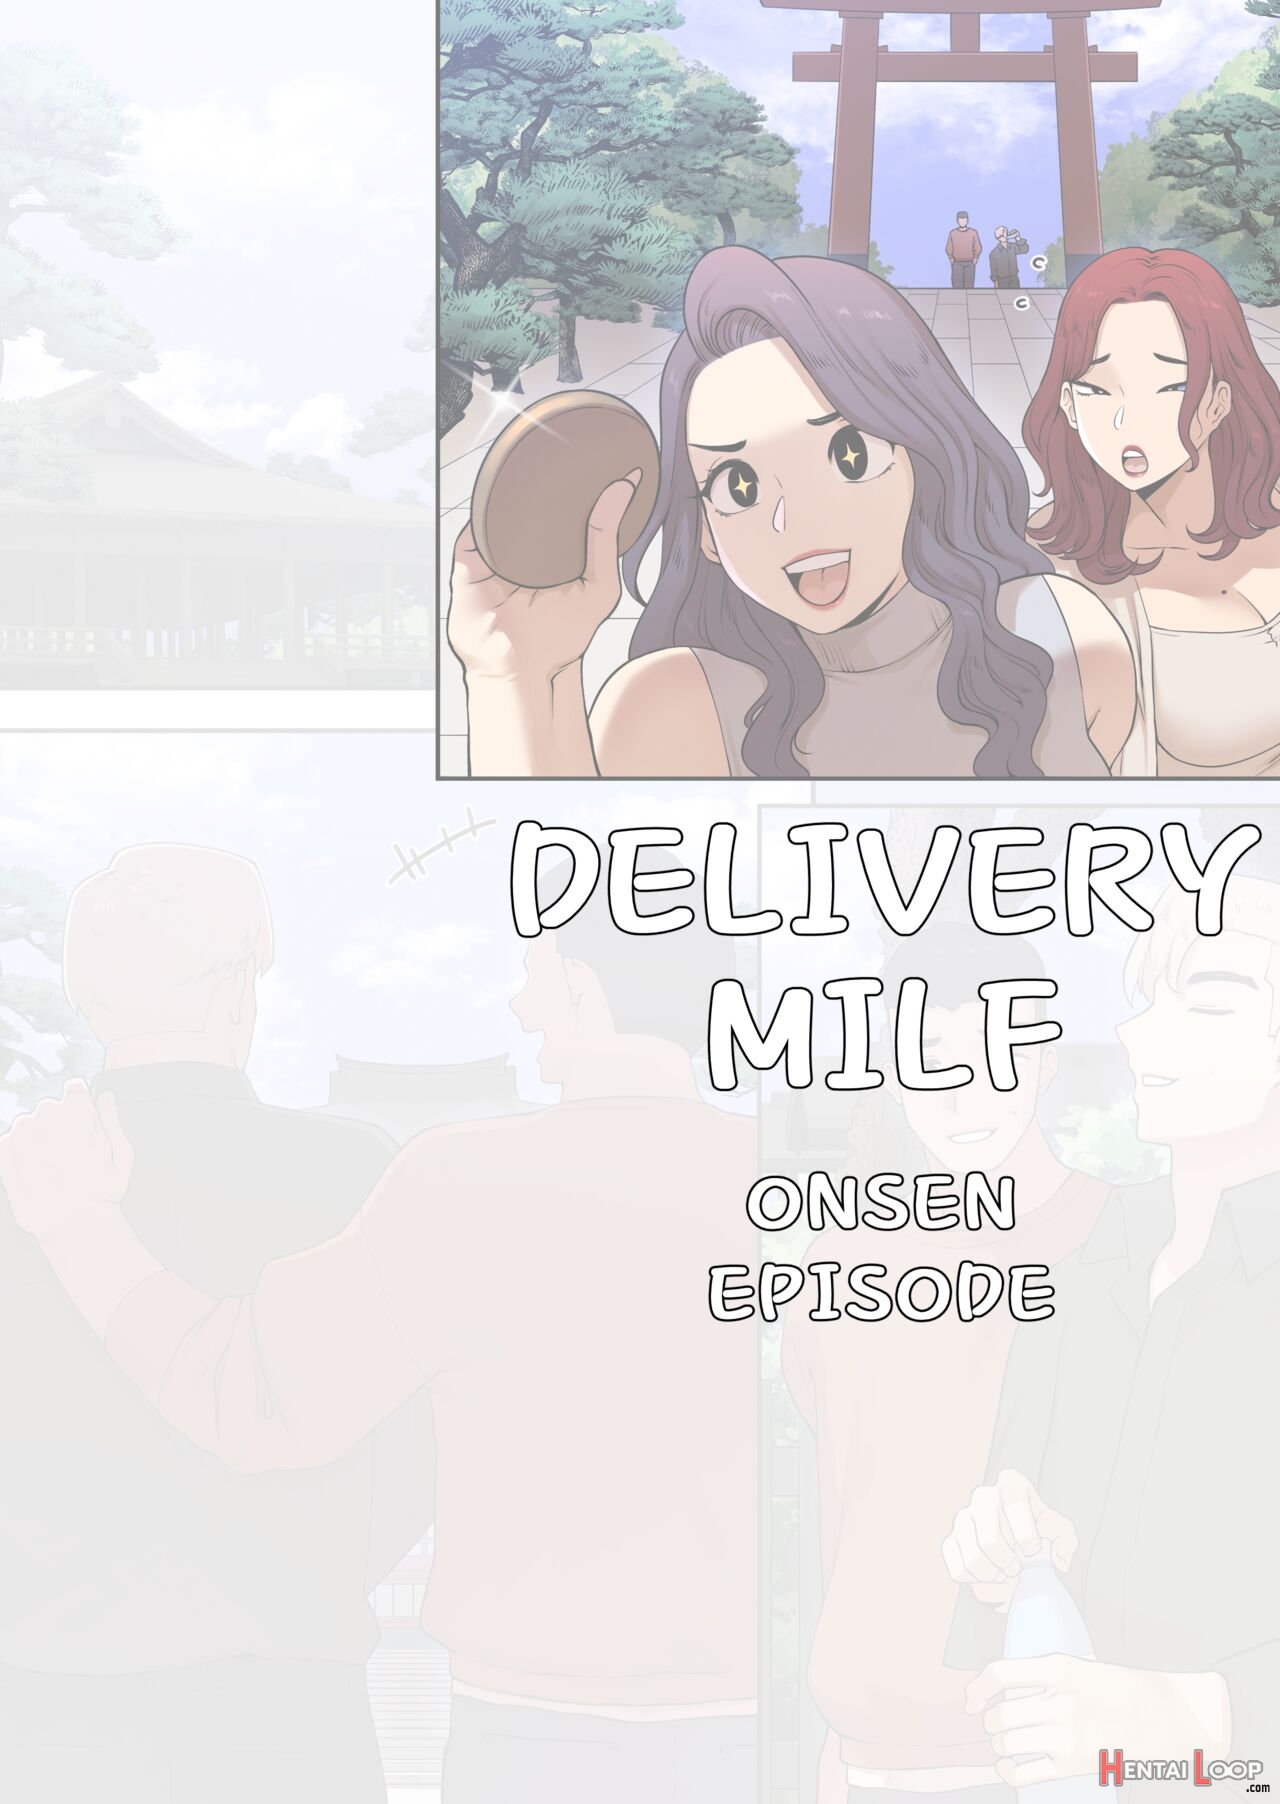 Delivery Milf Onsen Episode page 1